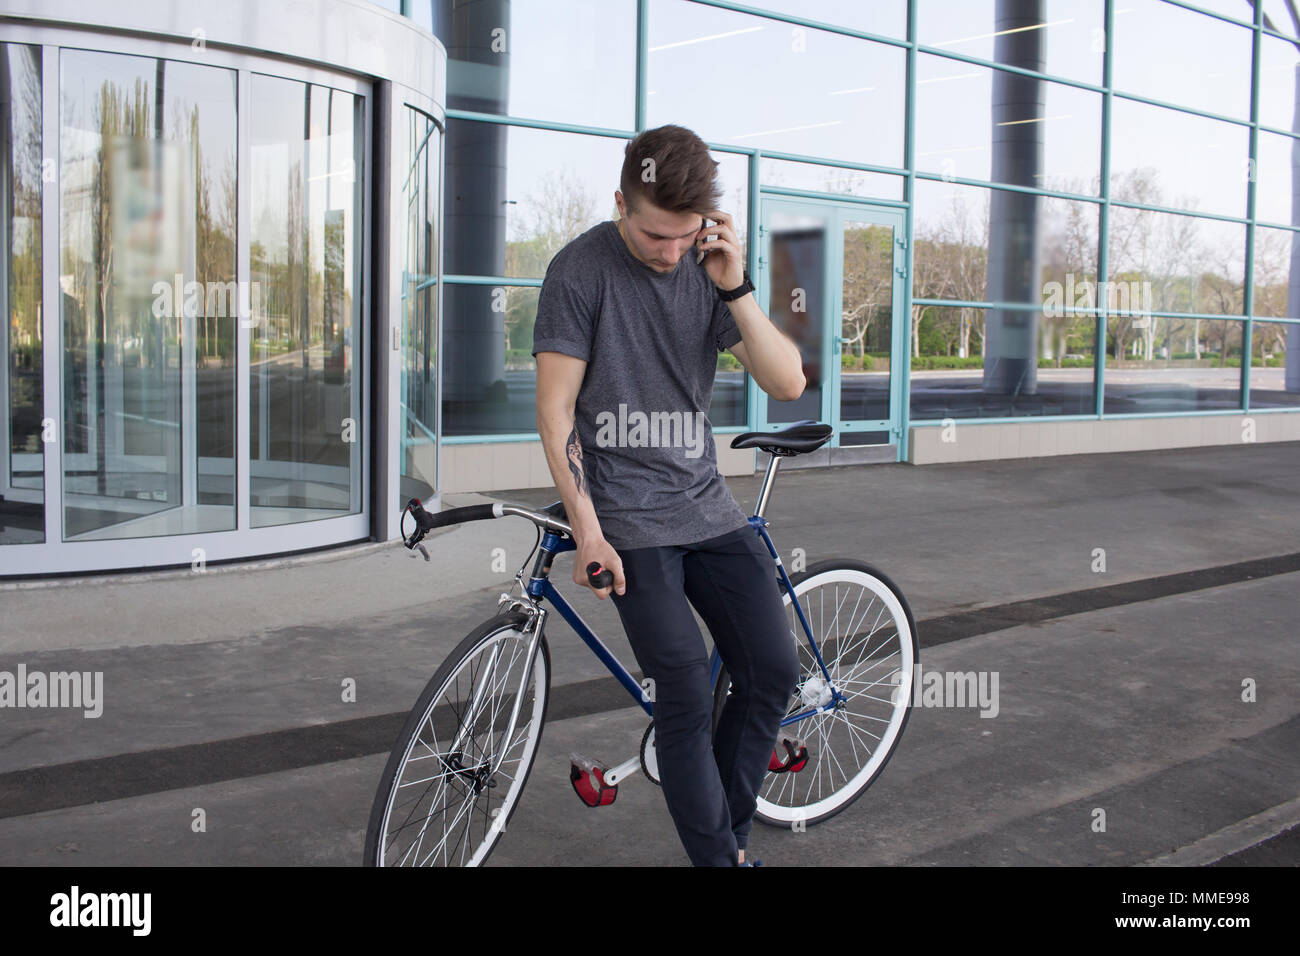 young hipster use cellphone, fixed gear bike on city street. big mirror windows background, urban bicycle rider Stock Photo